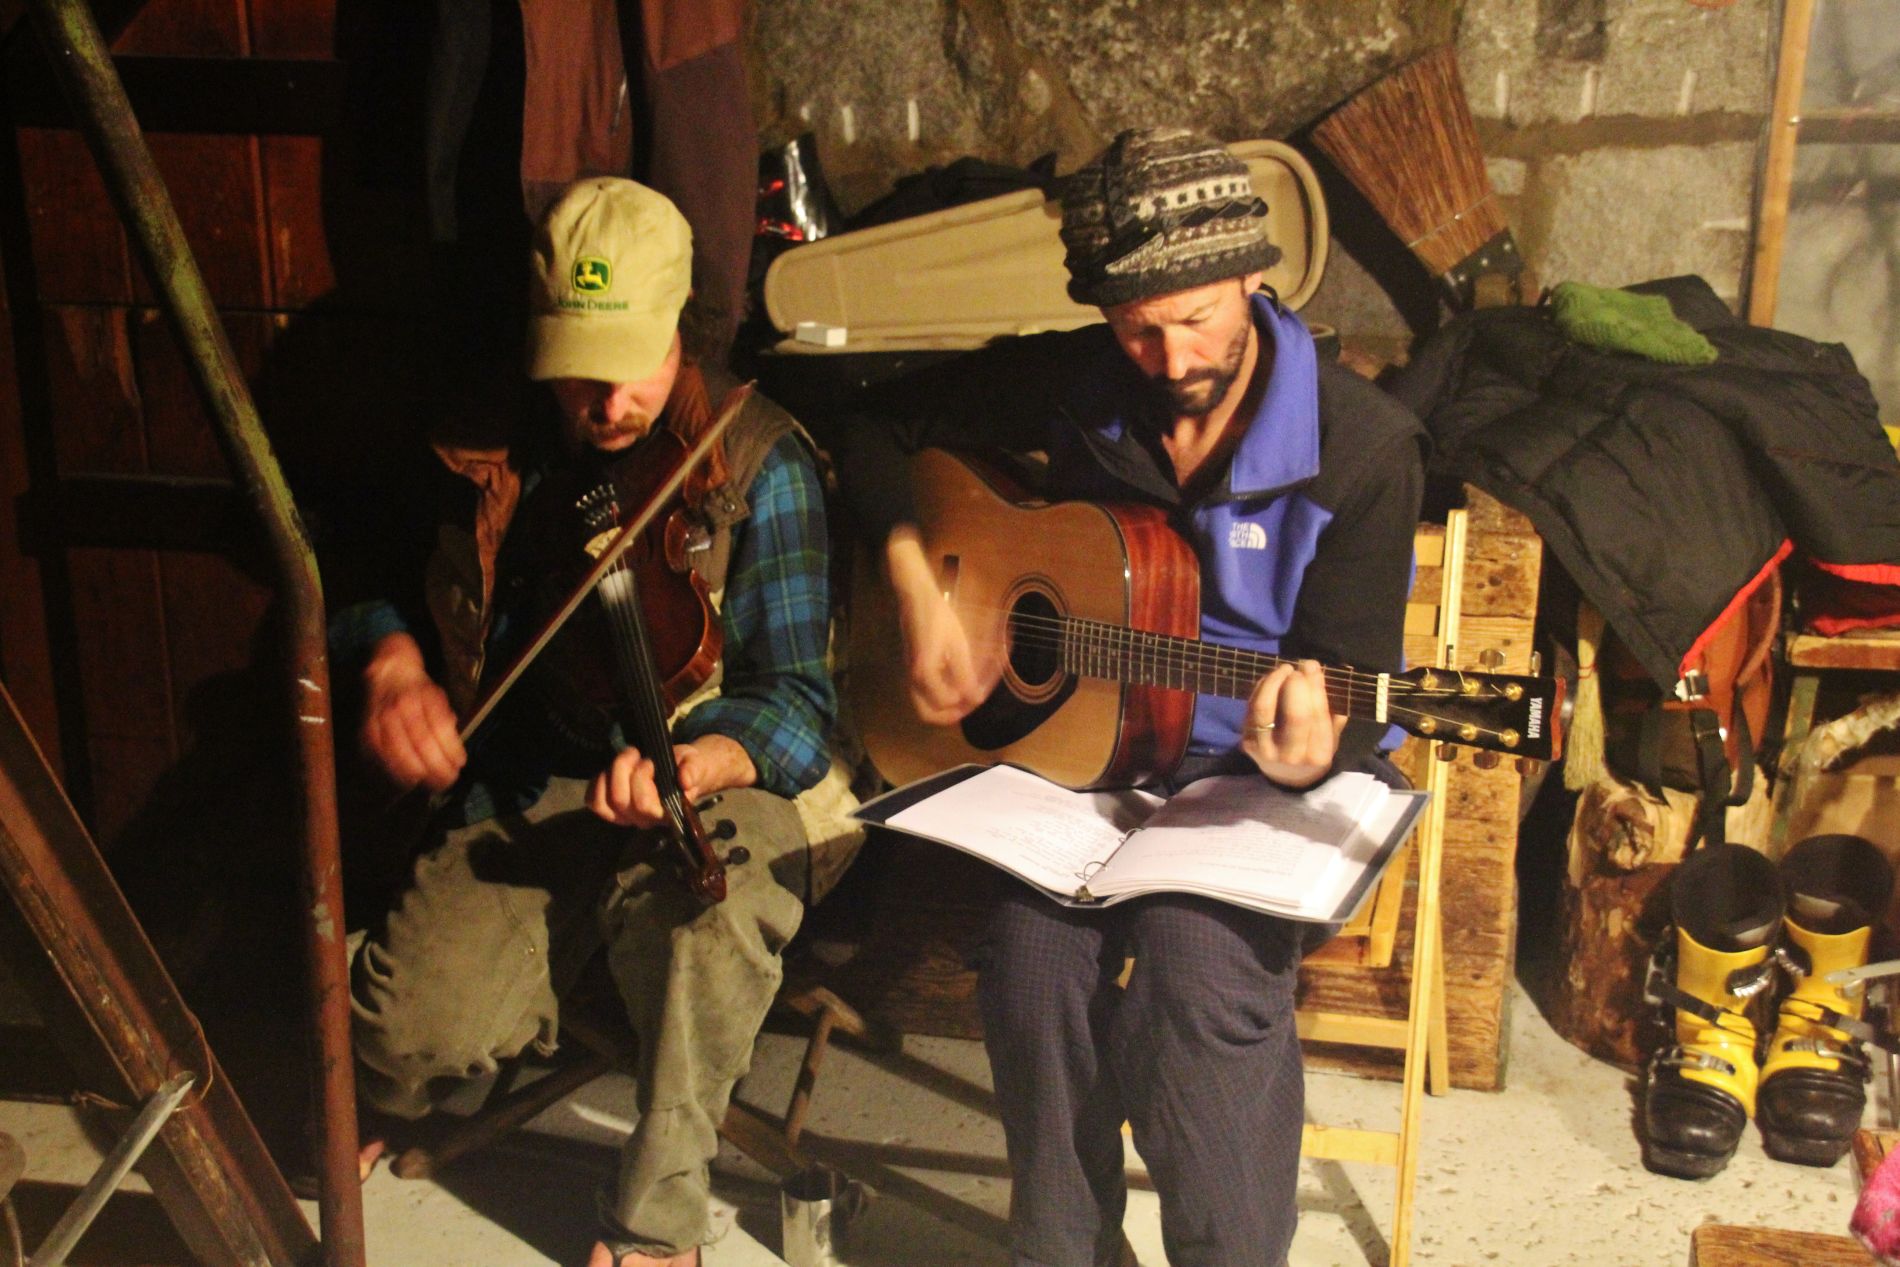 Caretakers at the Ostrander ski hut treat guests to a fiddle and guitar concert.